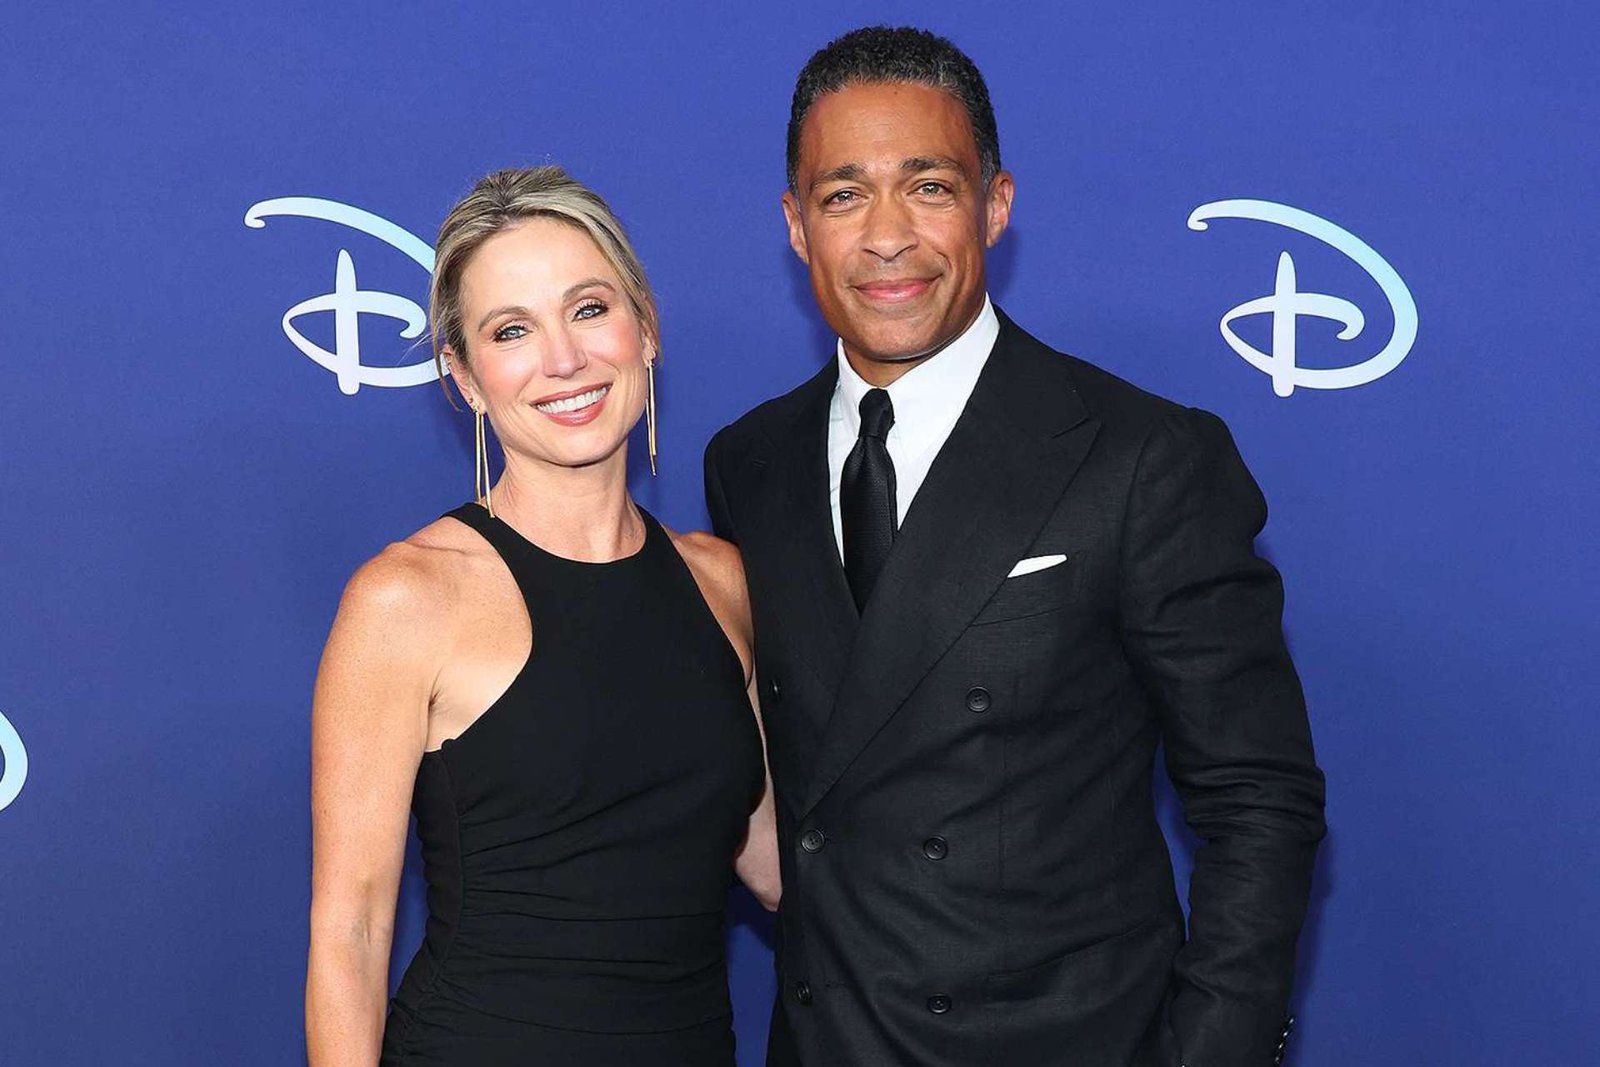 Amy Robach and T.J. Holmes' Podcast Faces Decline In Ratings One Month After Debut